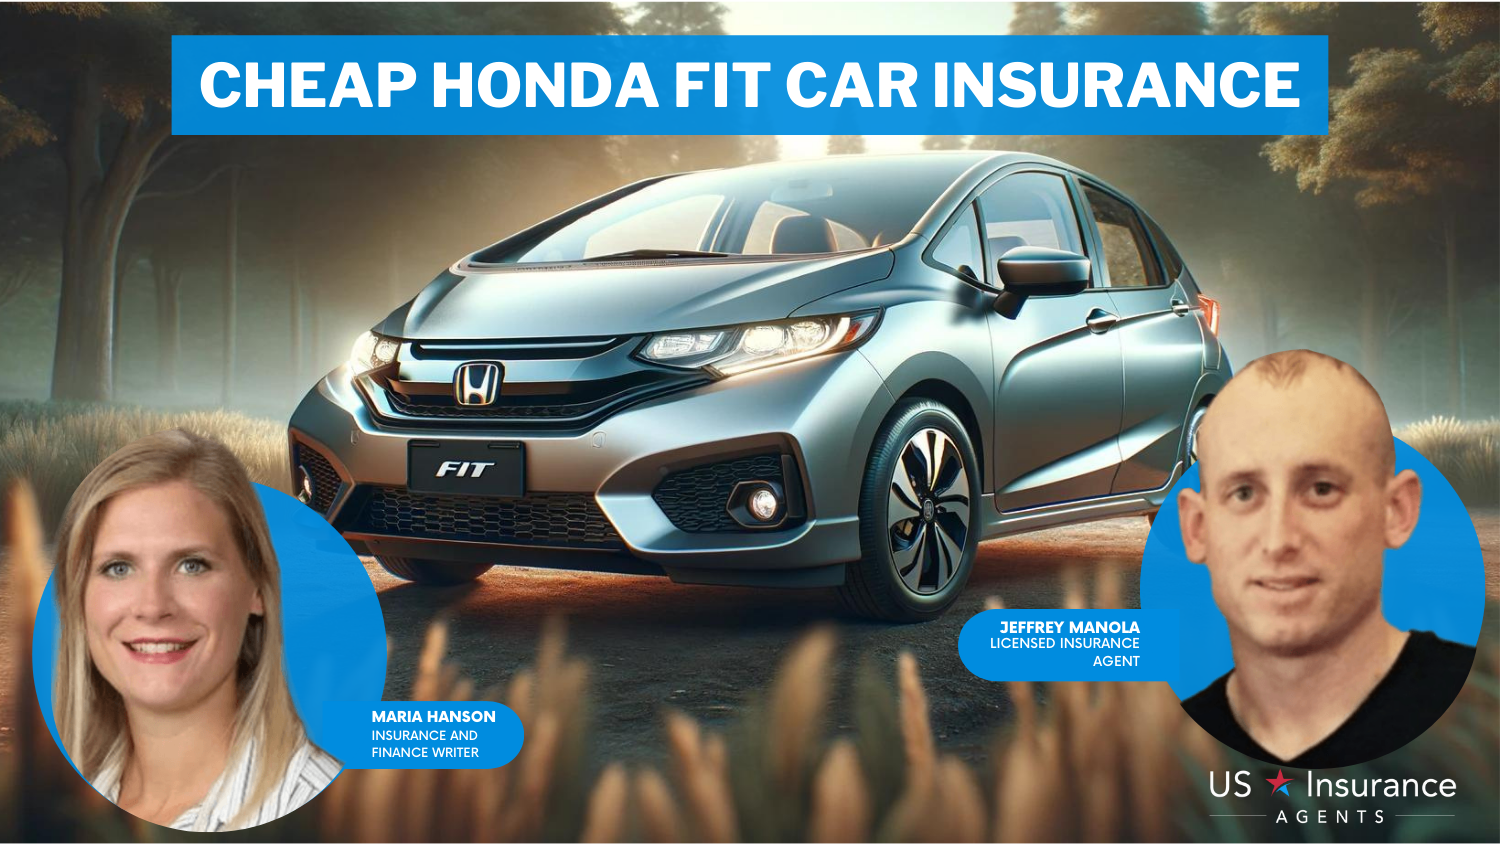 Amica, Auto Owners, Nationwide: cheap Honda Fit car insurance